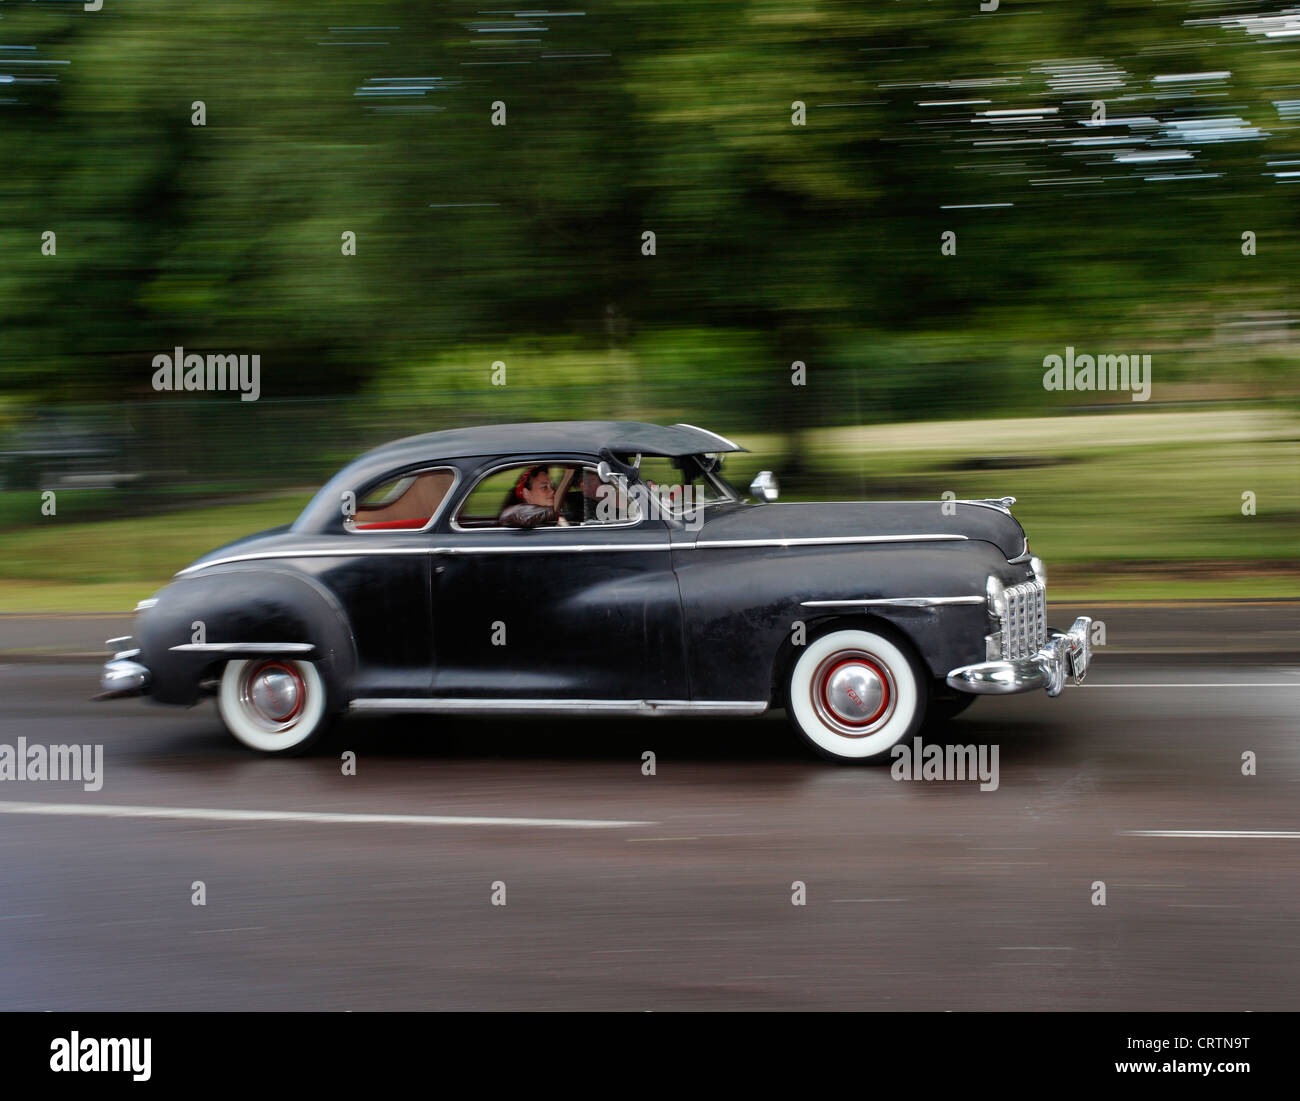 Hot rod Dodge 1947 traveling at speed. Stock Photo